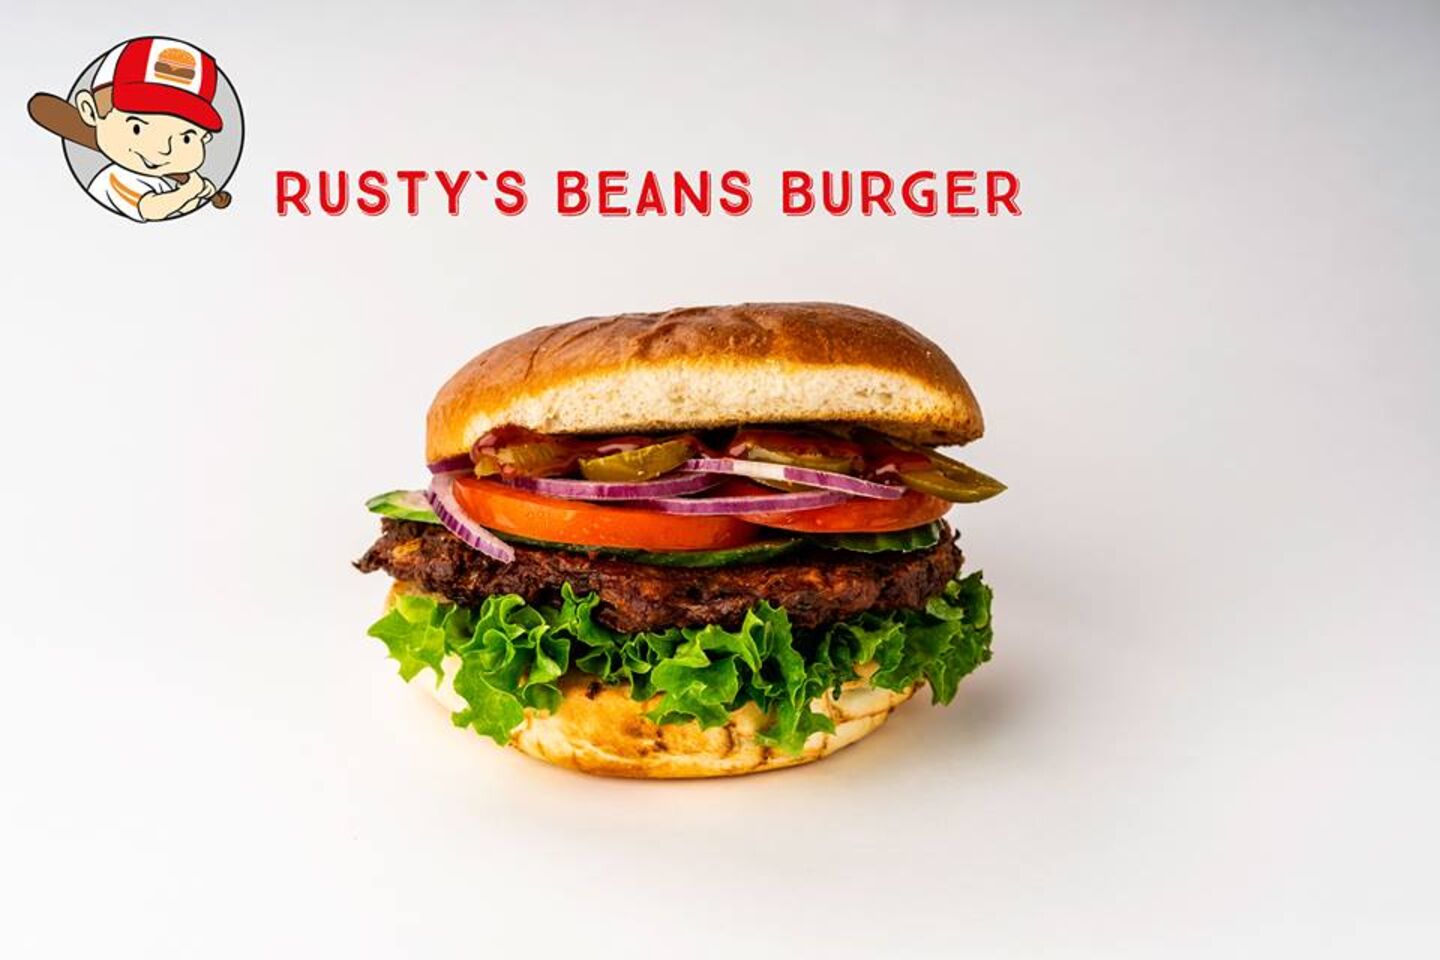 A photo of Rusty's Burgers